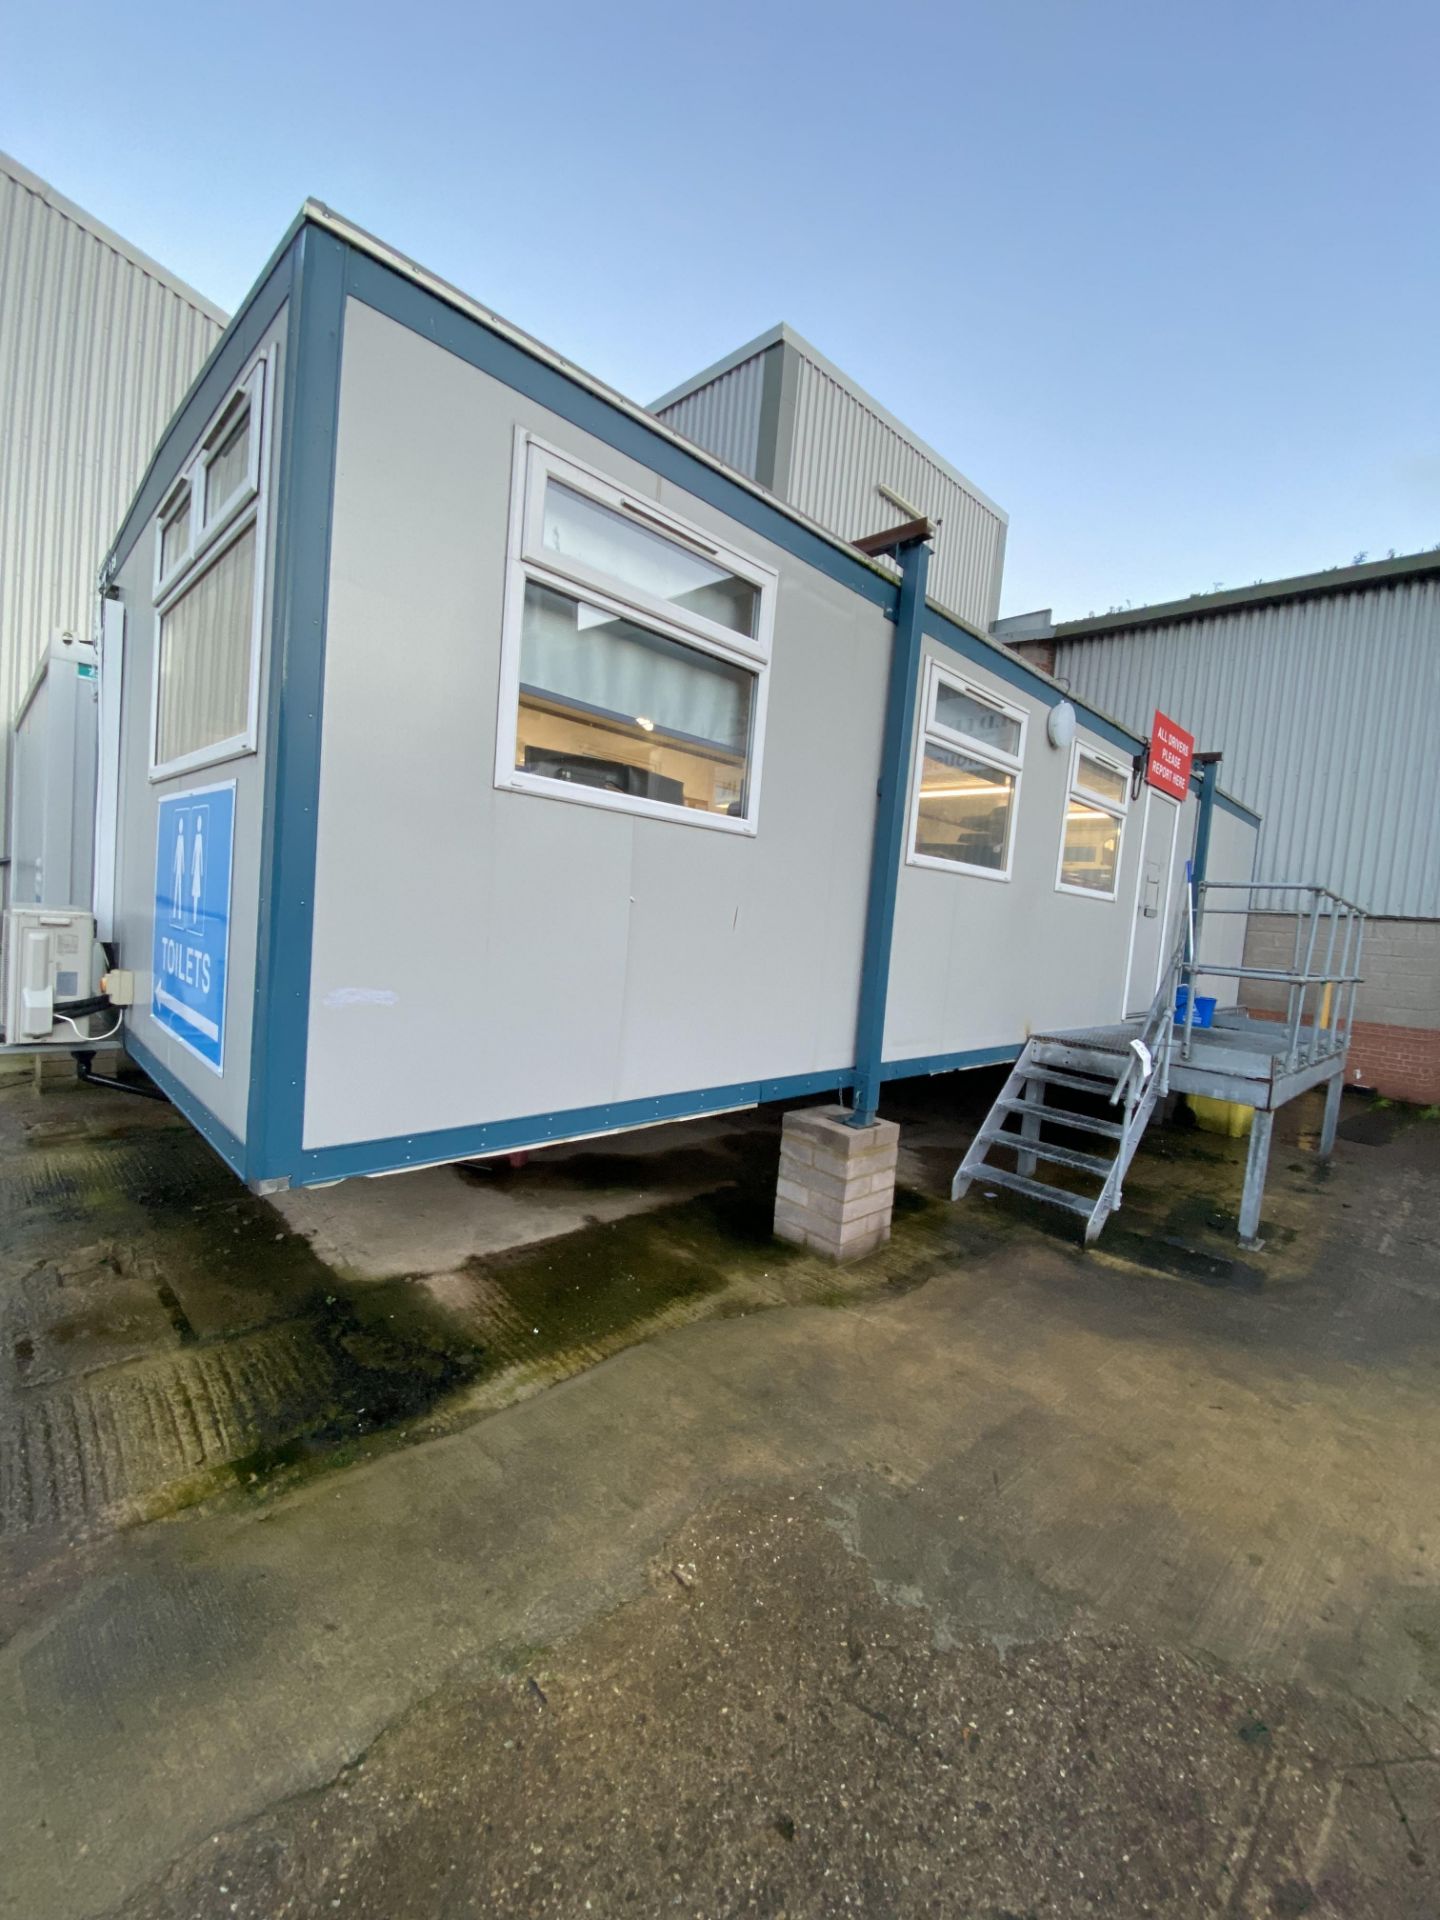 (AG-ENG) PORTABLE JACKLEG OFFICE BUILDING, approx. 11m long x 3.7m x 2.55m high, with external